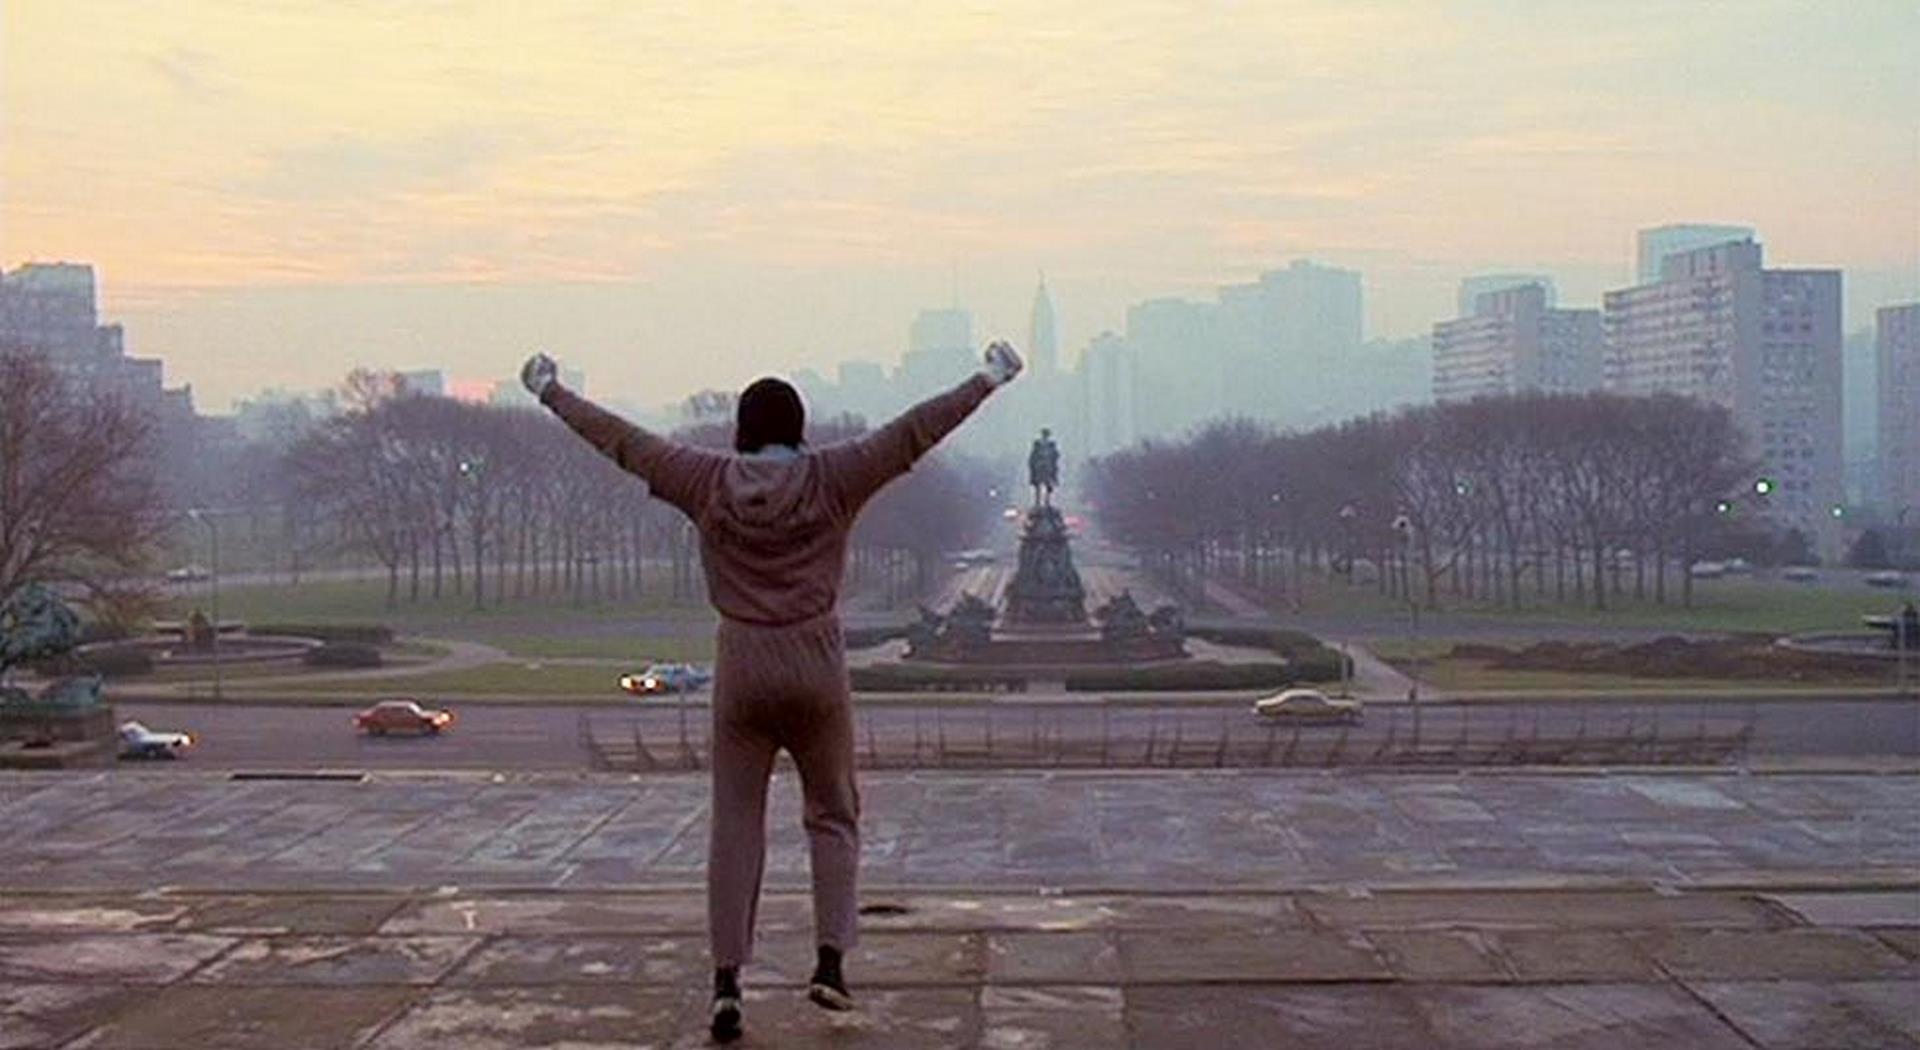 A picture of Sylvester Stallone as Rocky Balboa in the movie Rocky.